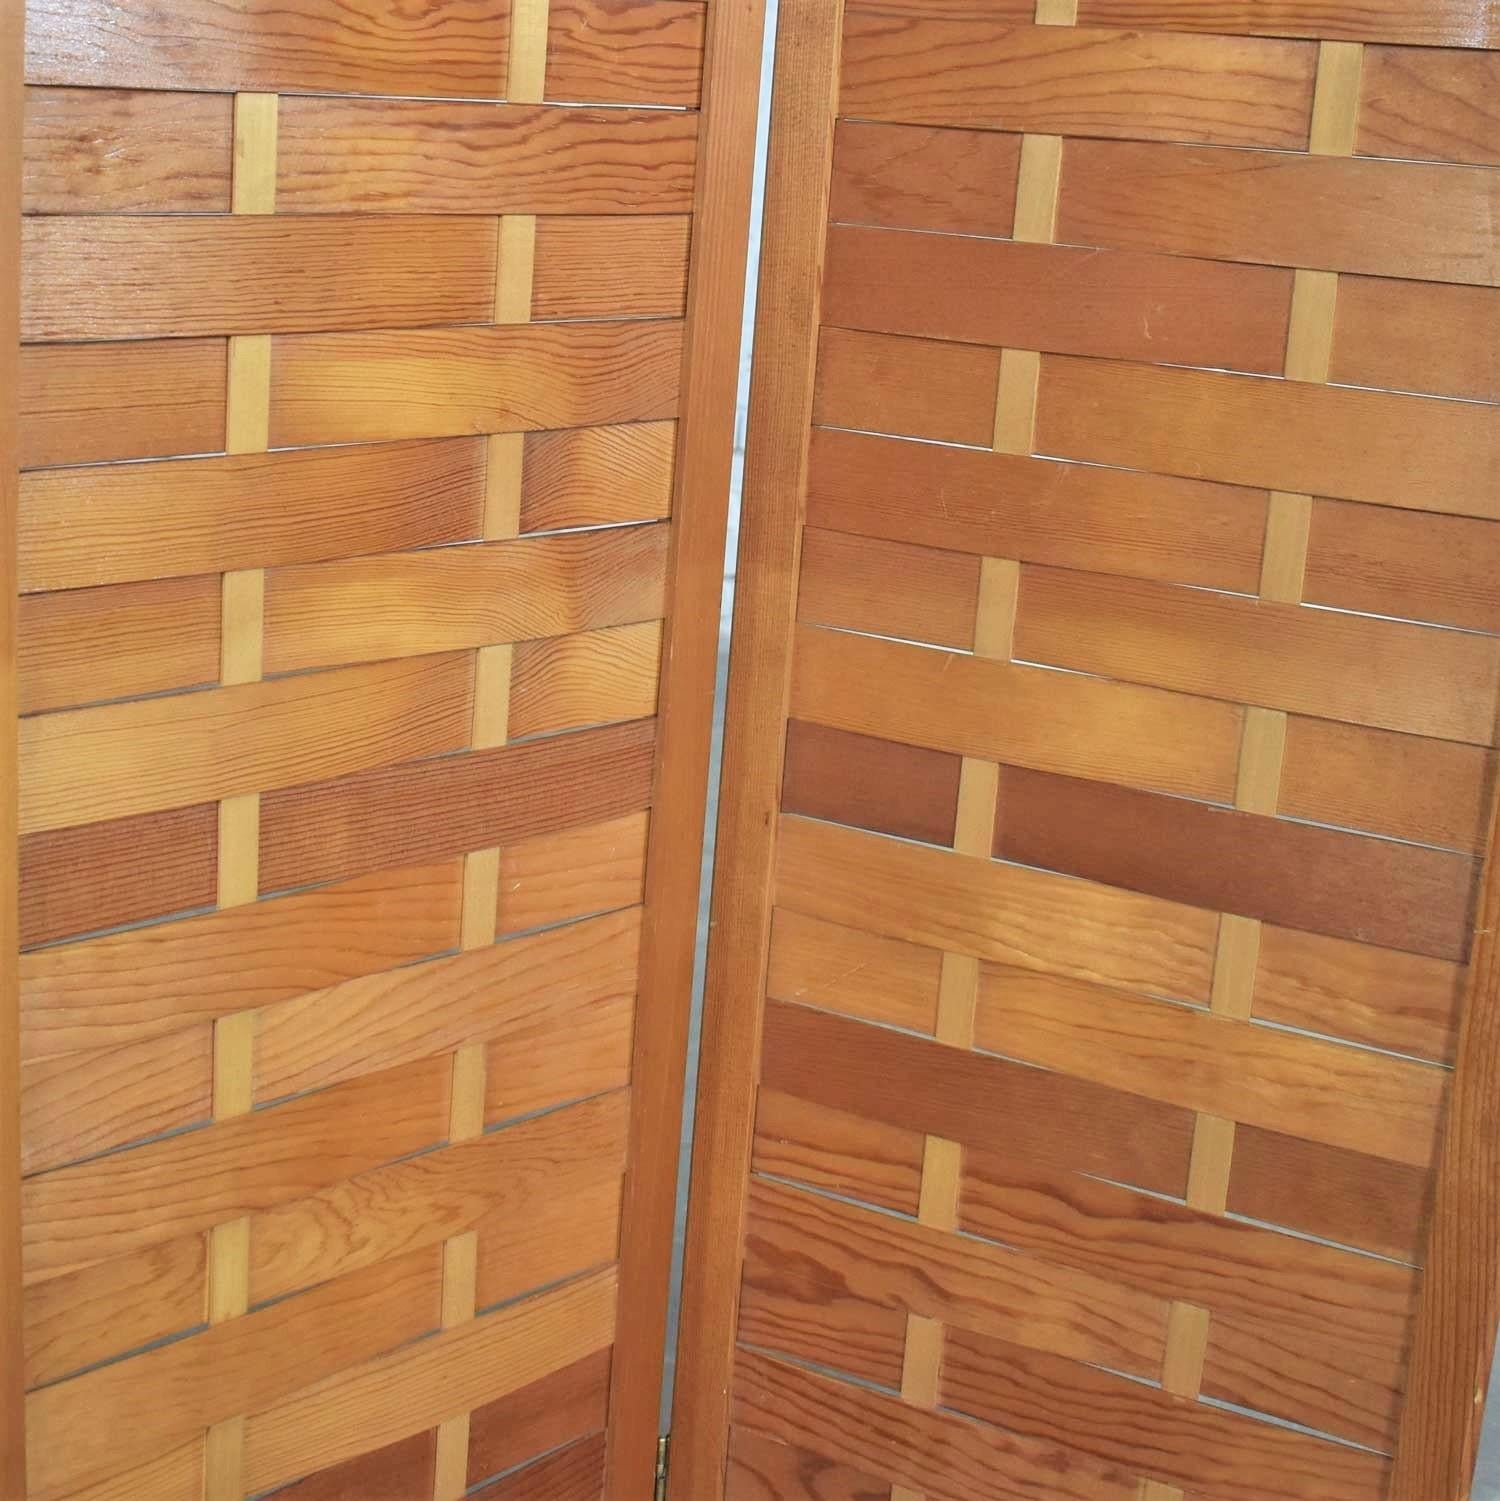 Midcentury Woven Wood Folding Screen 4-Panel Room Divider in Pine 3